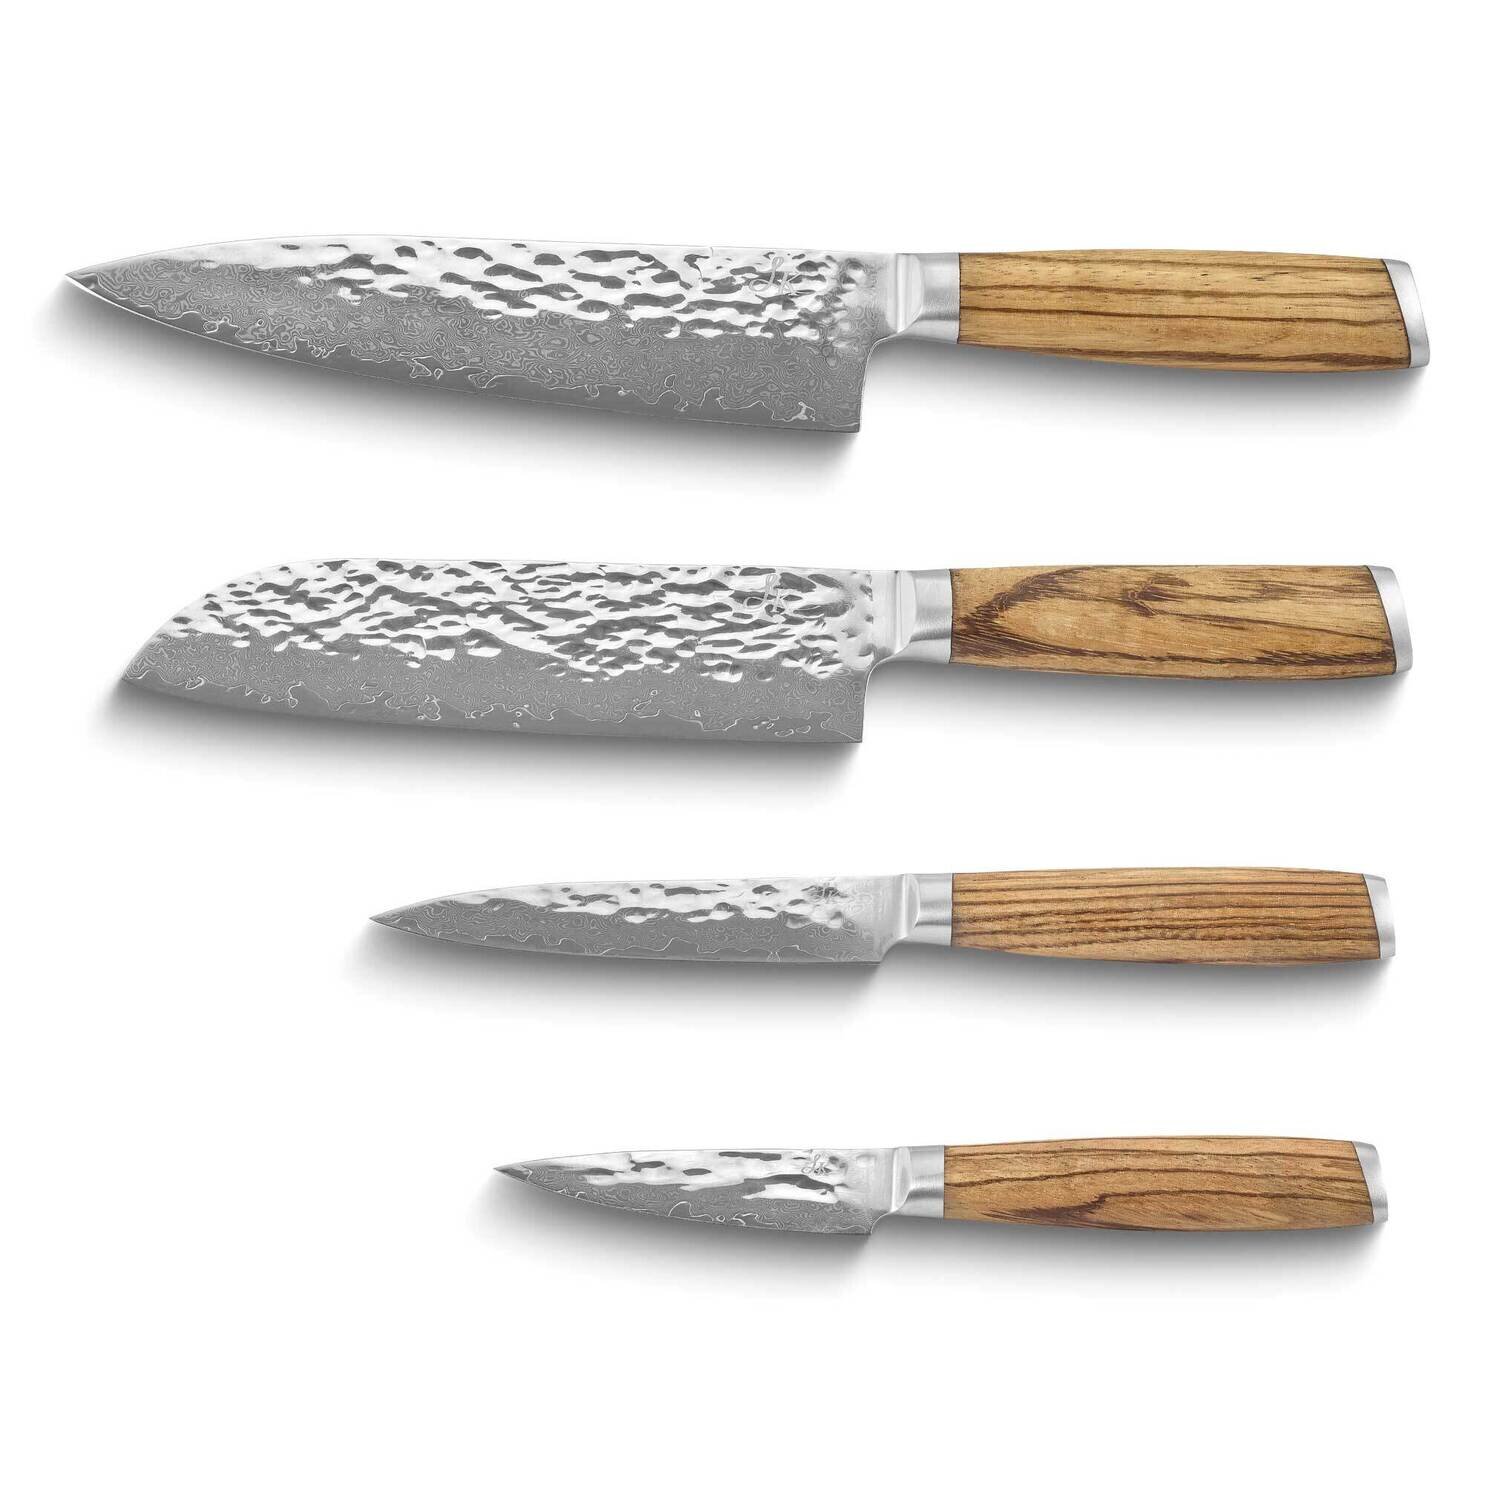 By Jere Luxury Knives Damacus Steel Hammered Finish Zebra Wood Handle 4 Chef Knife Set KNCHEF3